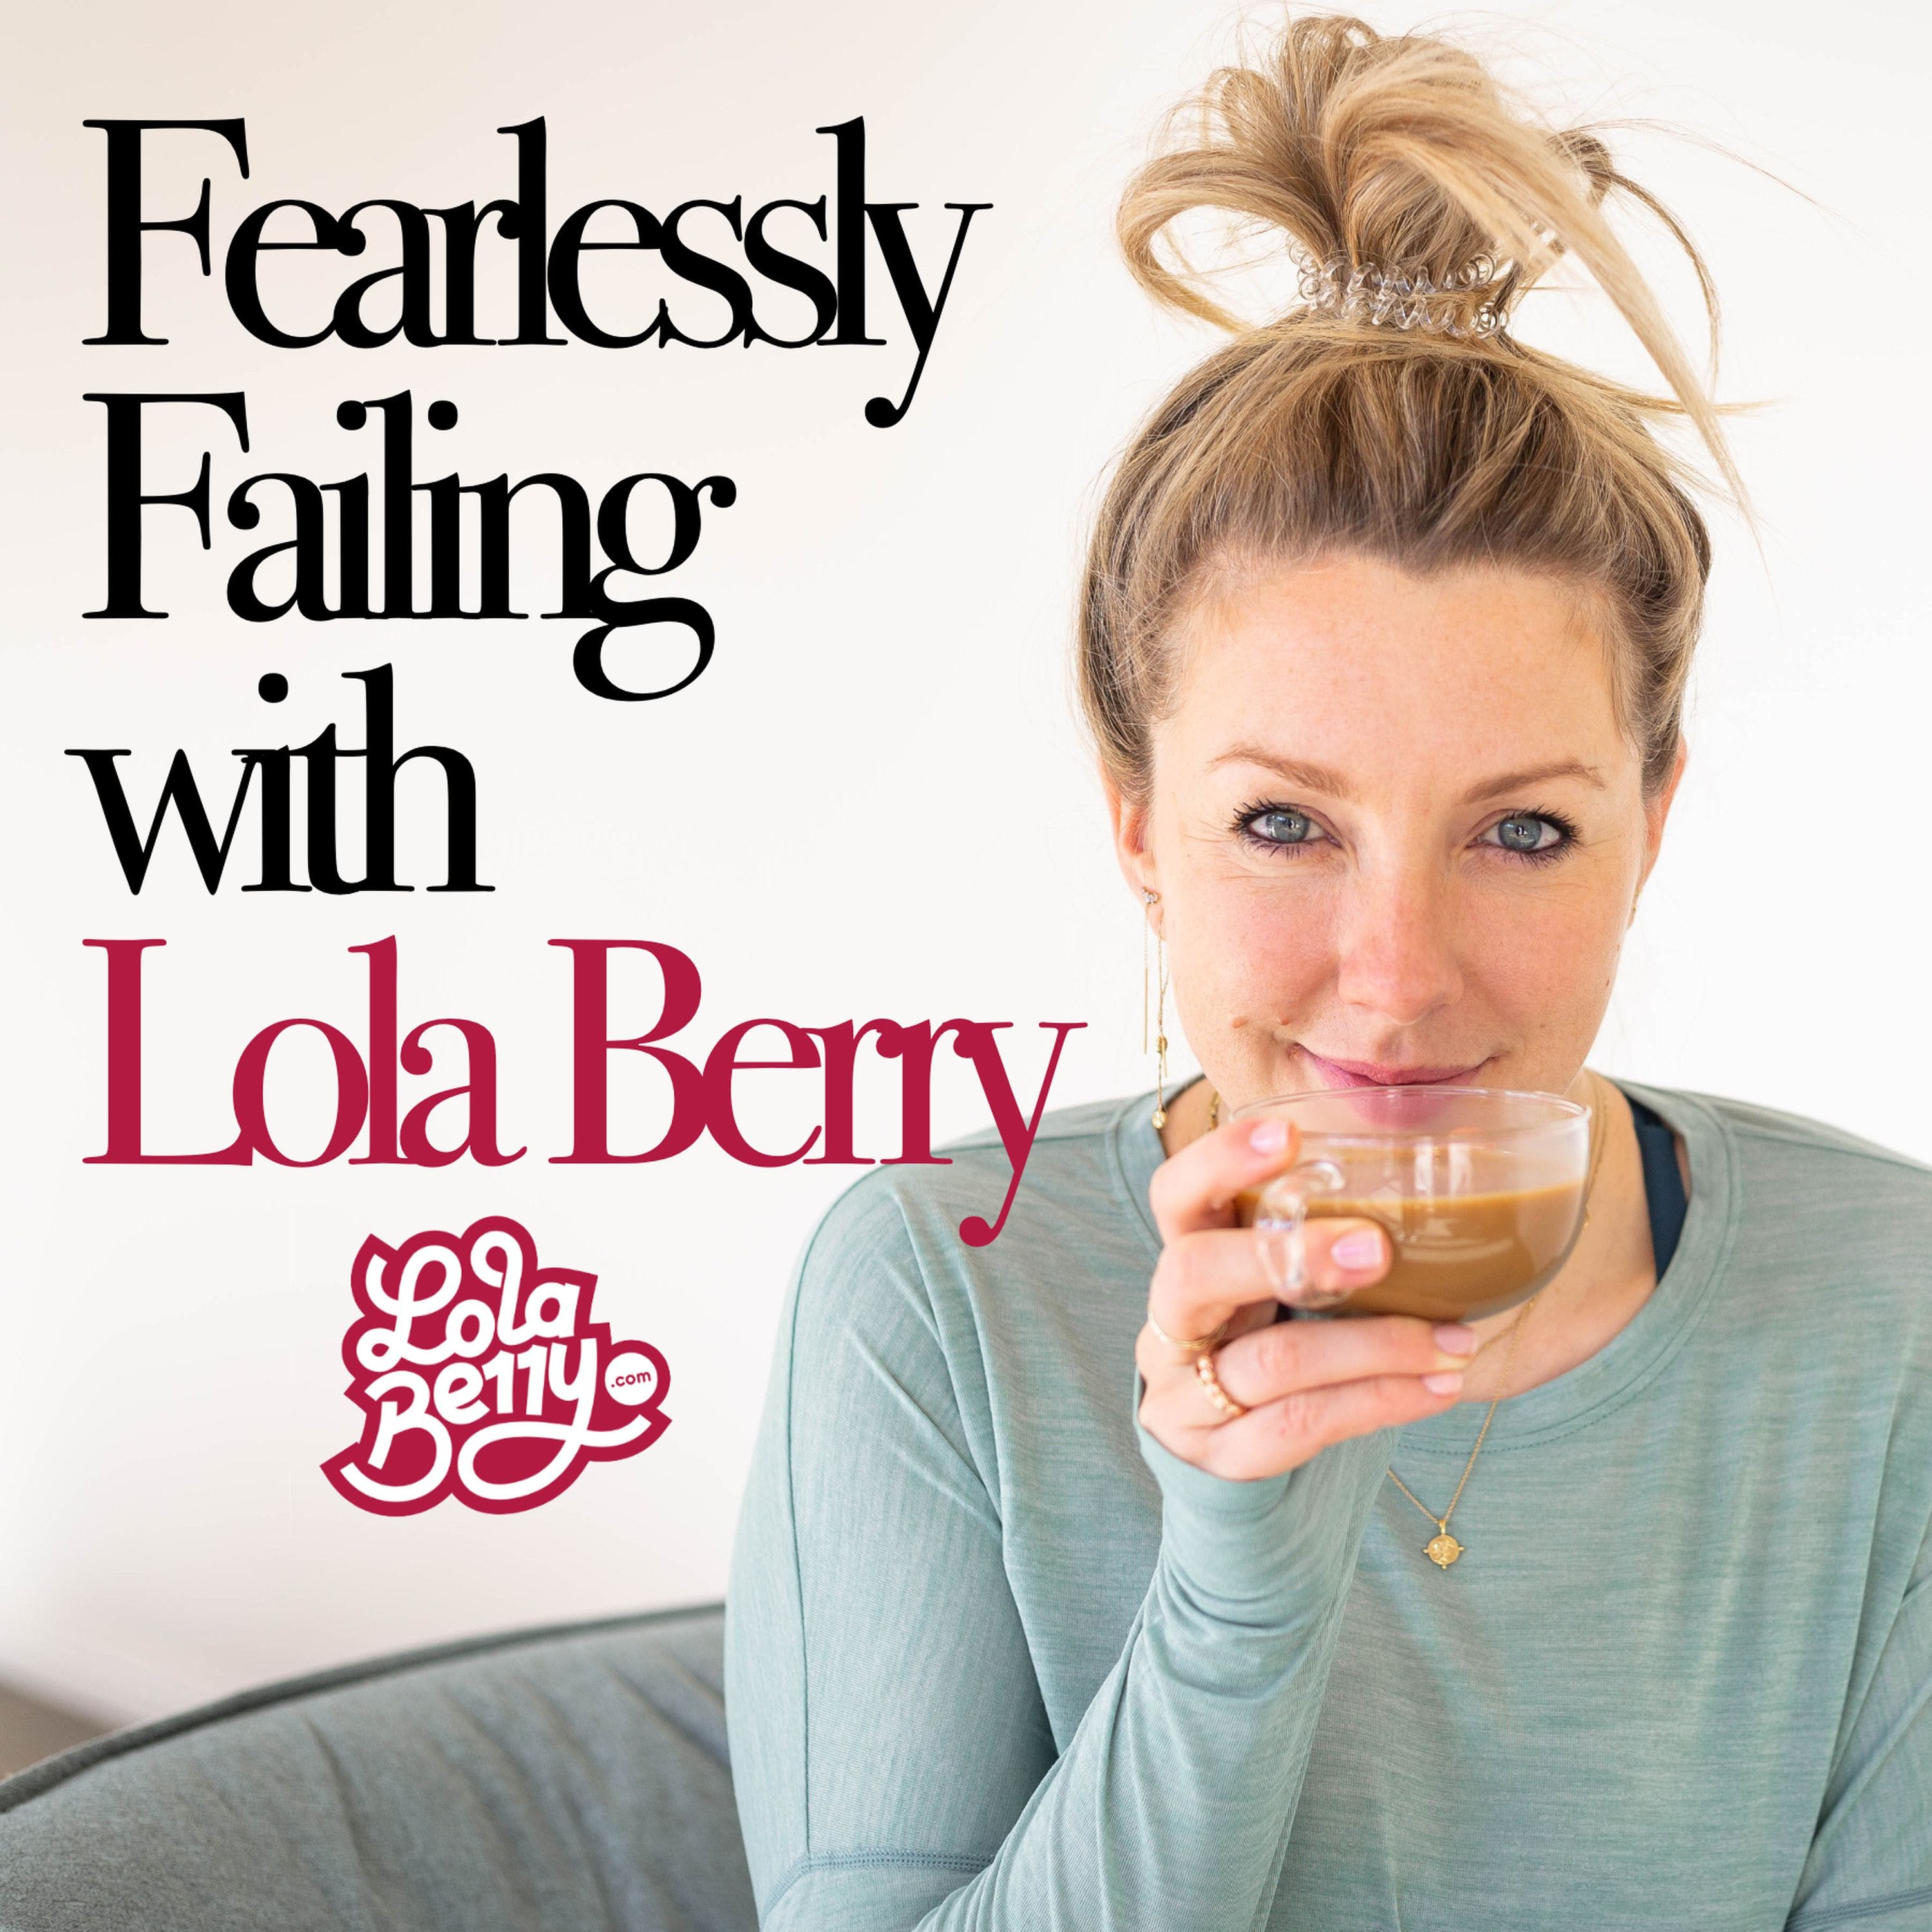 95. Fearlessly Failing: E News and Pregnancy with Ksenija Lukich